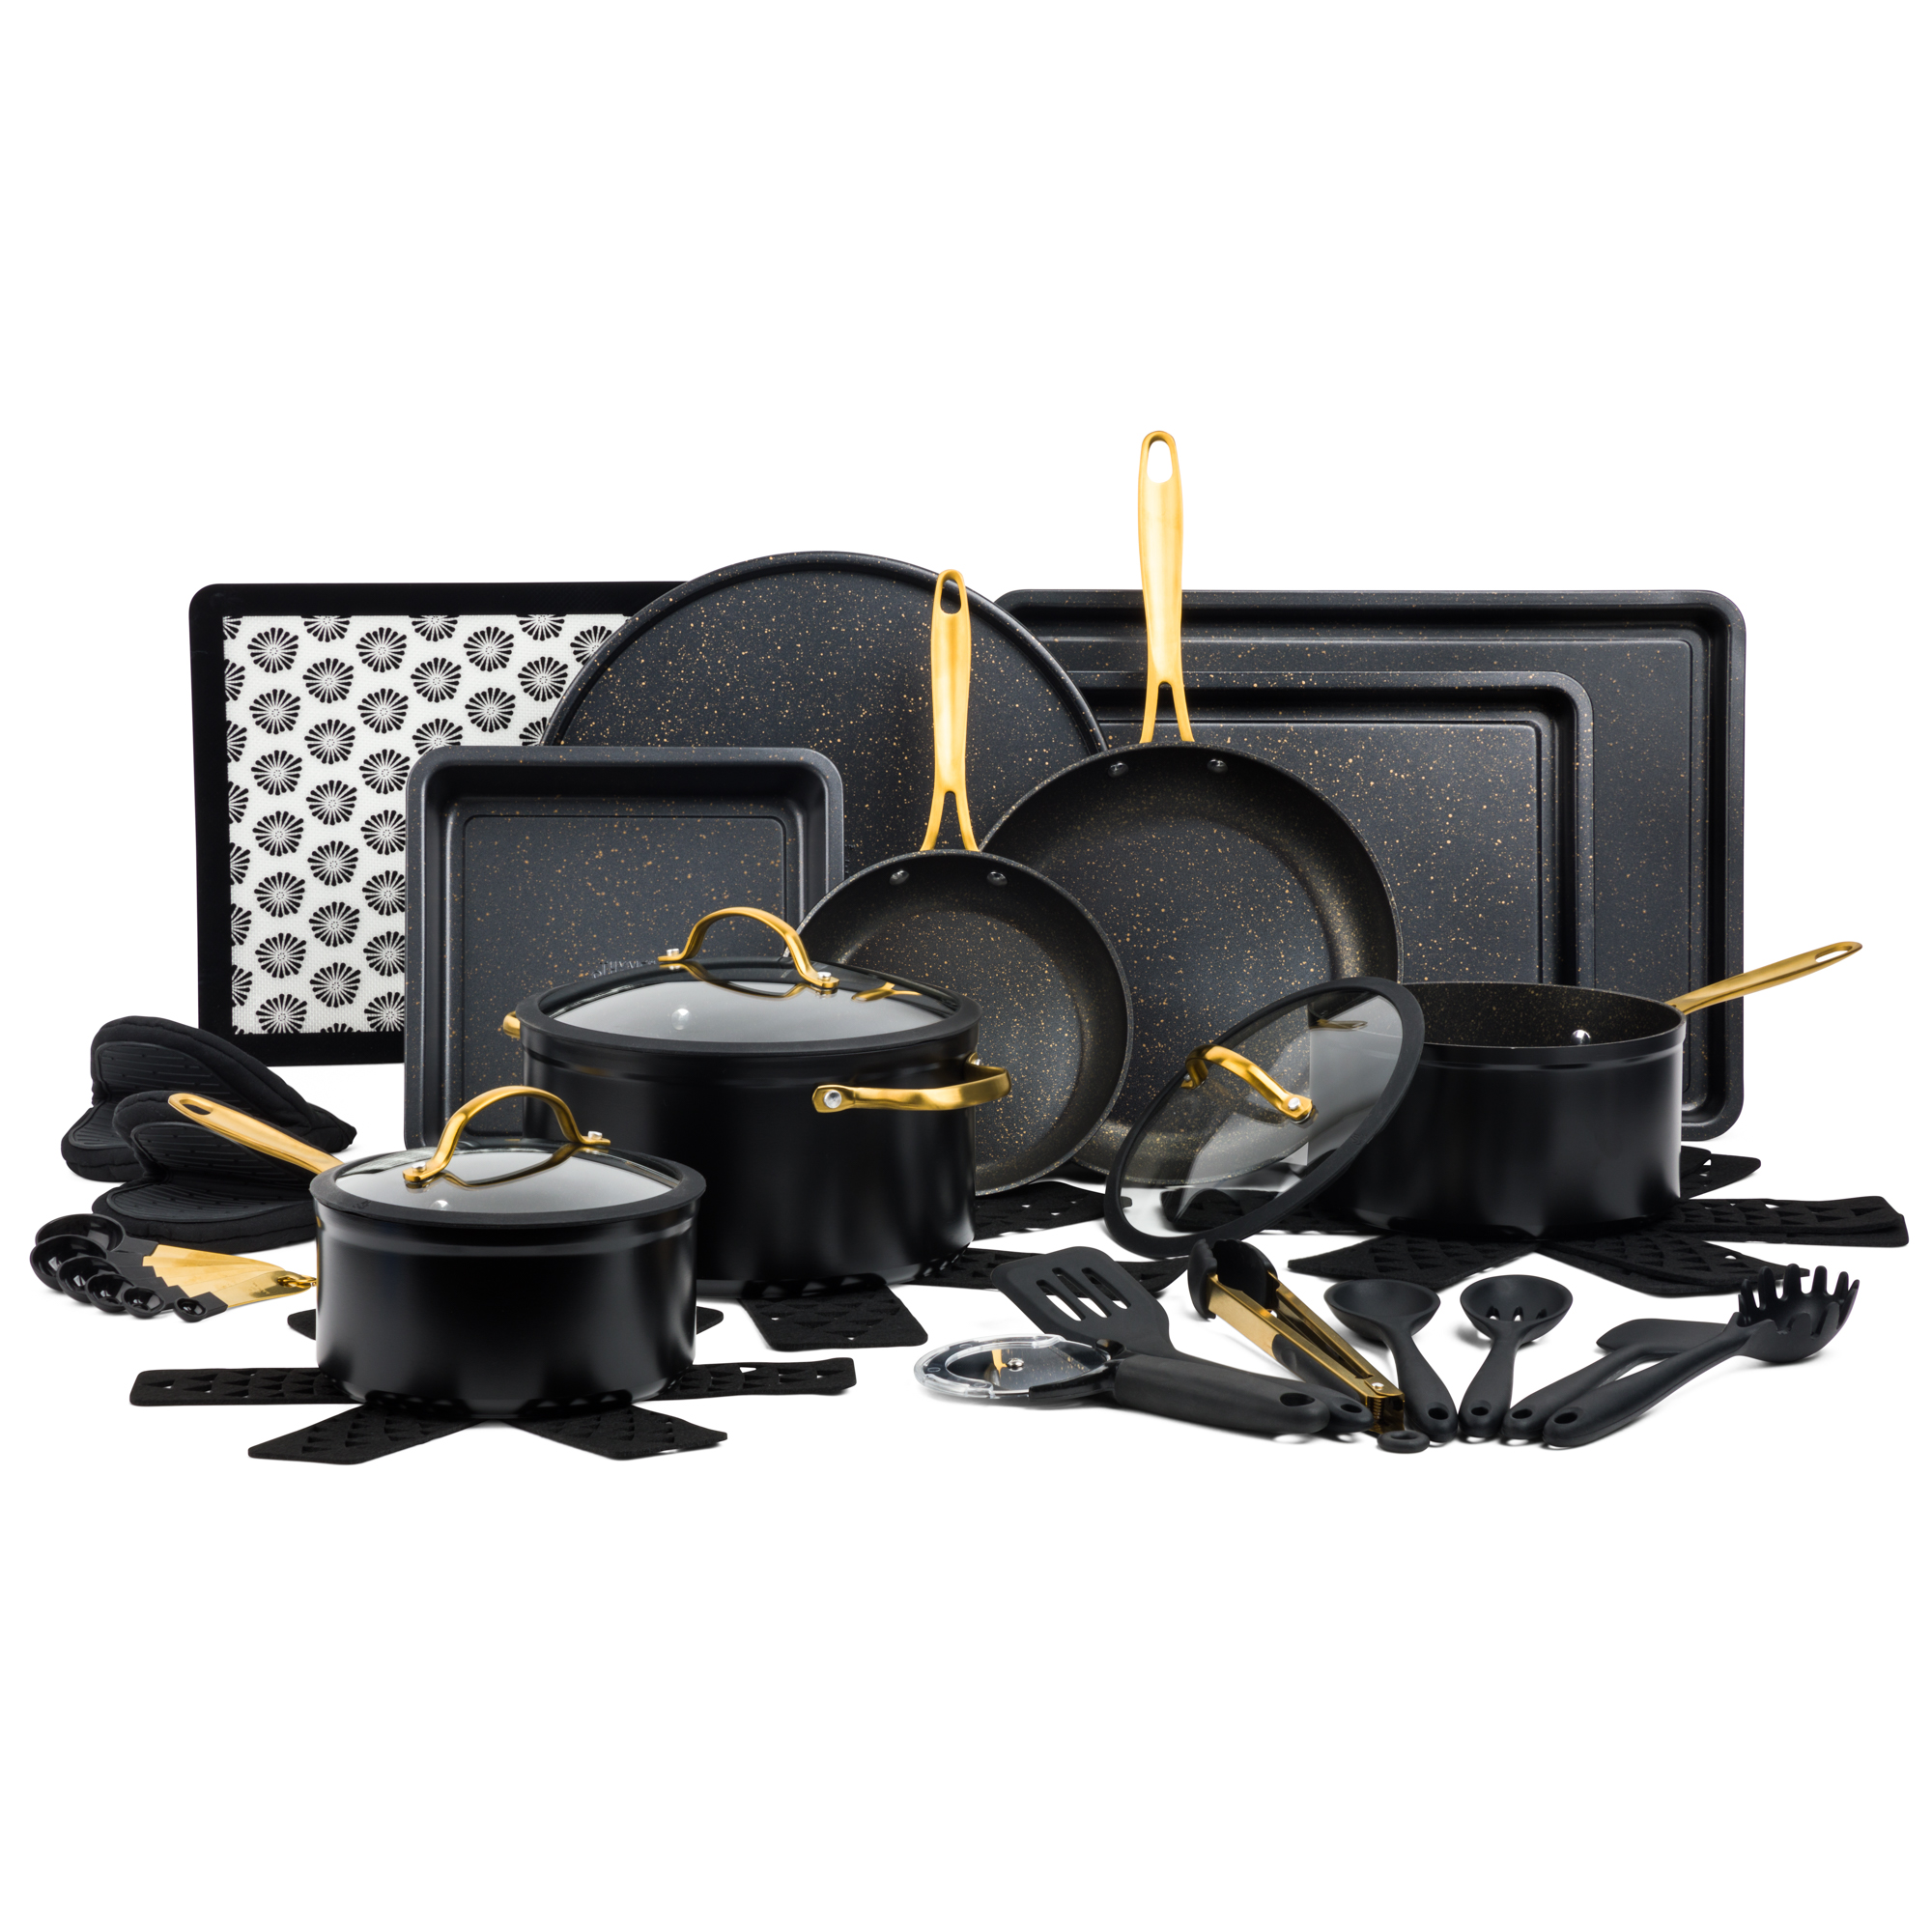 Thyme & Table 32-Piece Cookware & Bakeware Non-Stick Set, Black - image 1 of 6